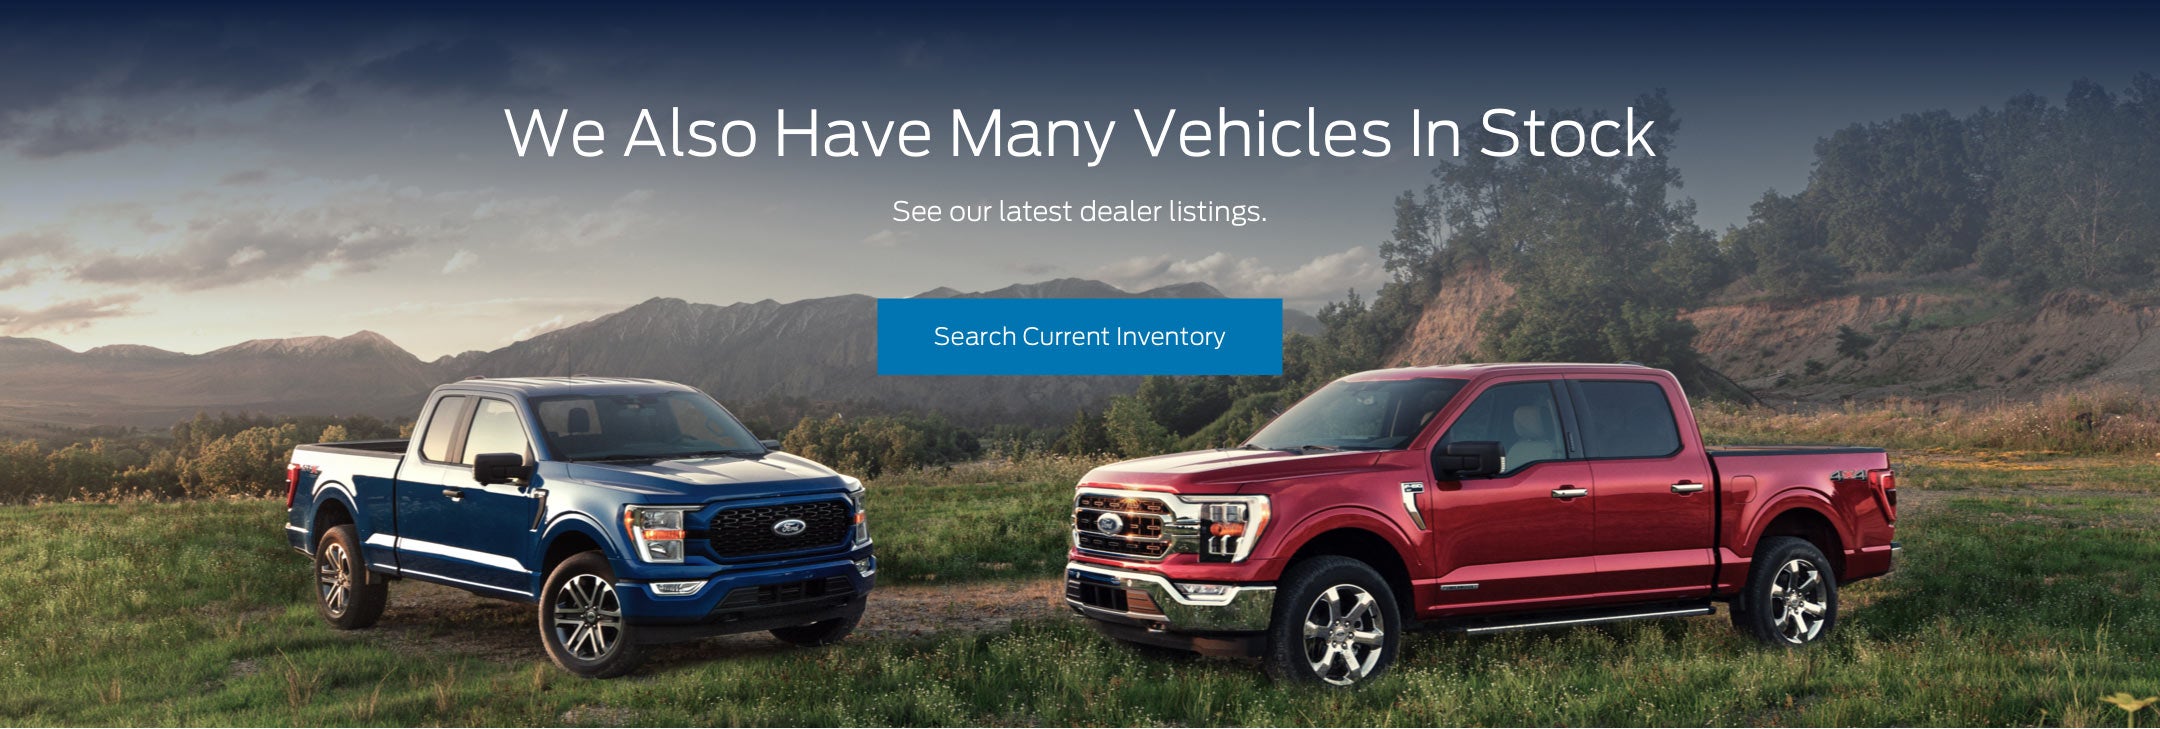 Ford vehicles in stock | McDonald Ford in Freeland MI